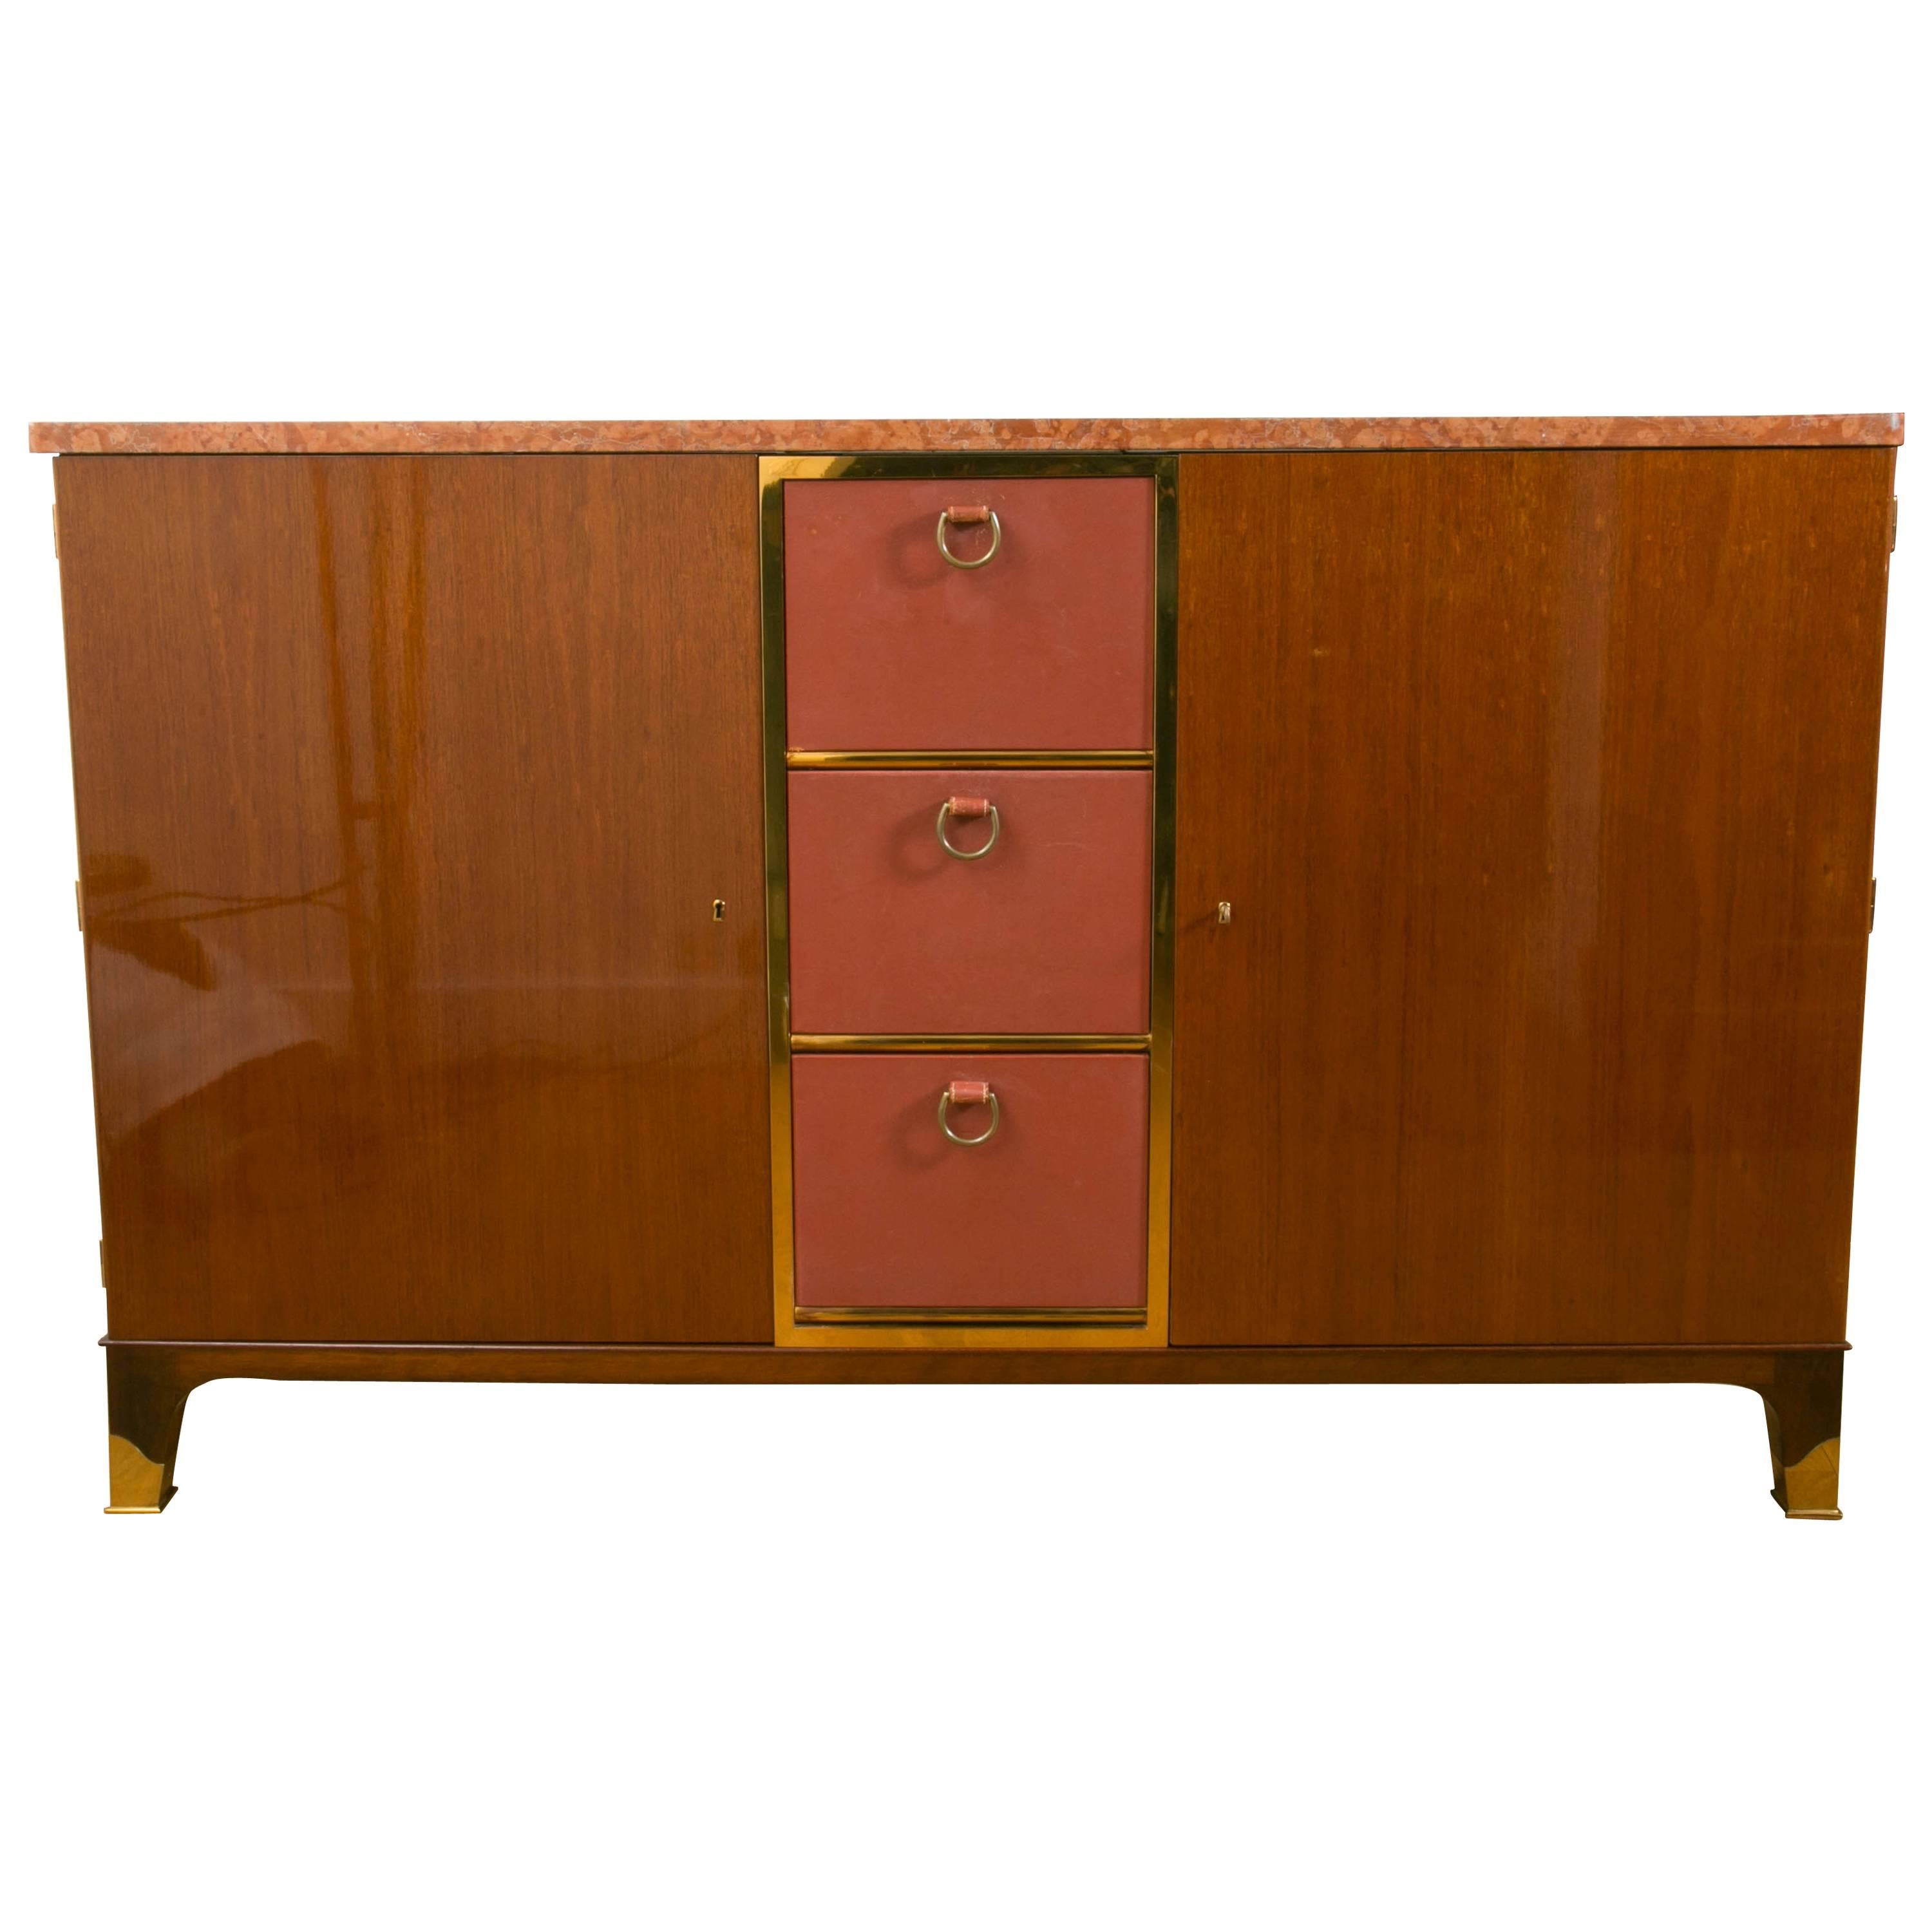 Rare mahogany and leather Sideboard cabinet, 1958, by P.Dupré-Lafon, France. For Sale